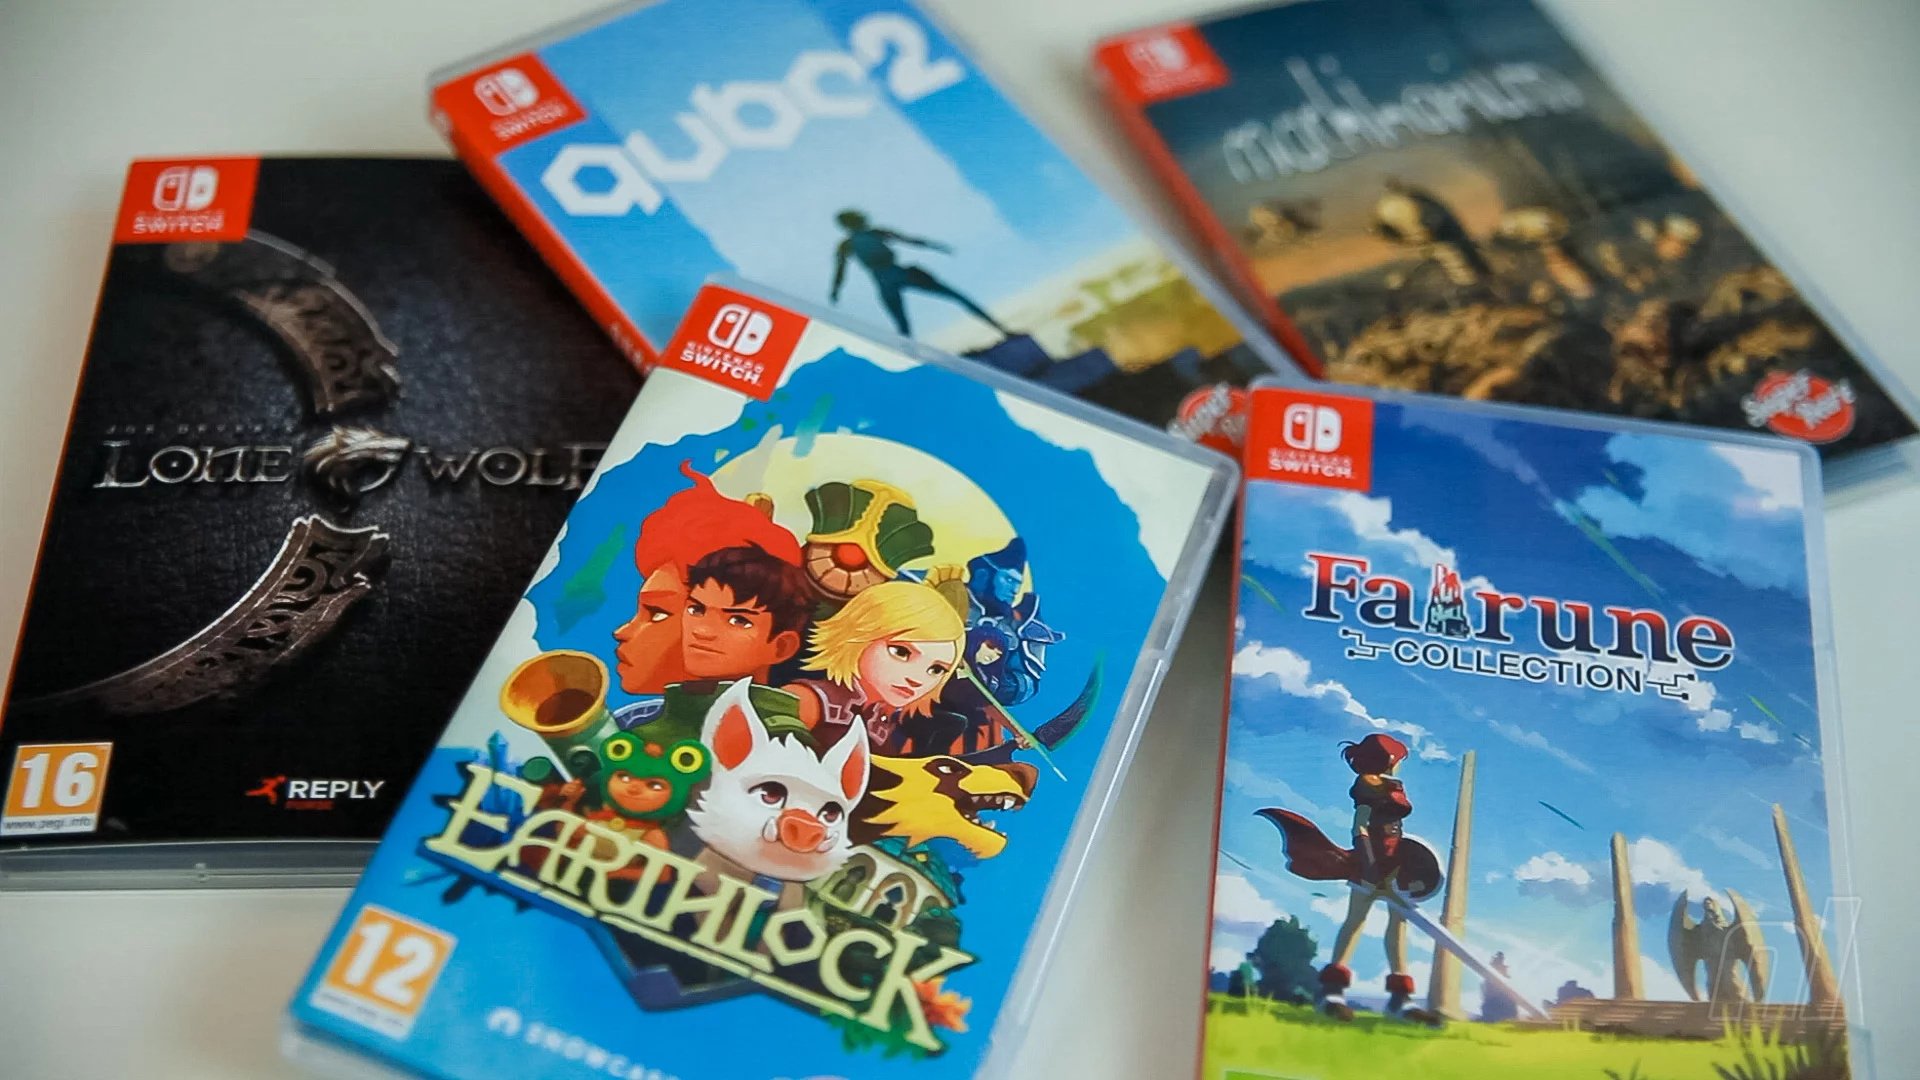 all physical switch games